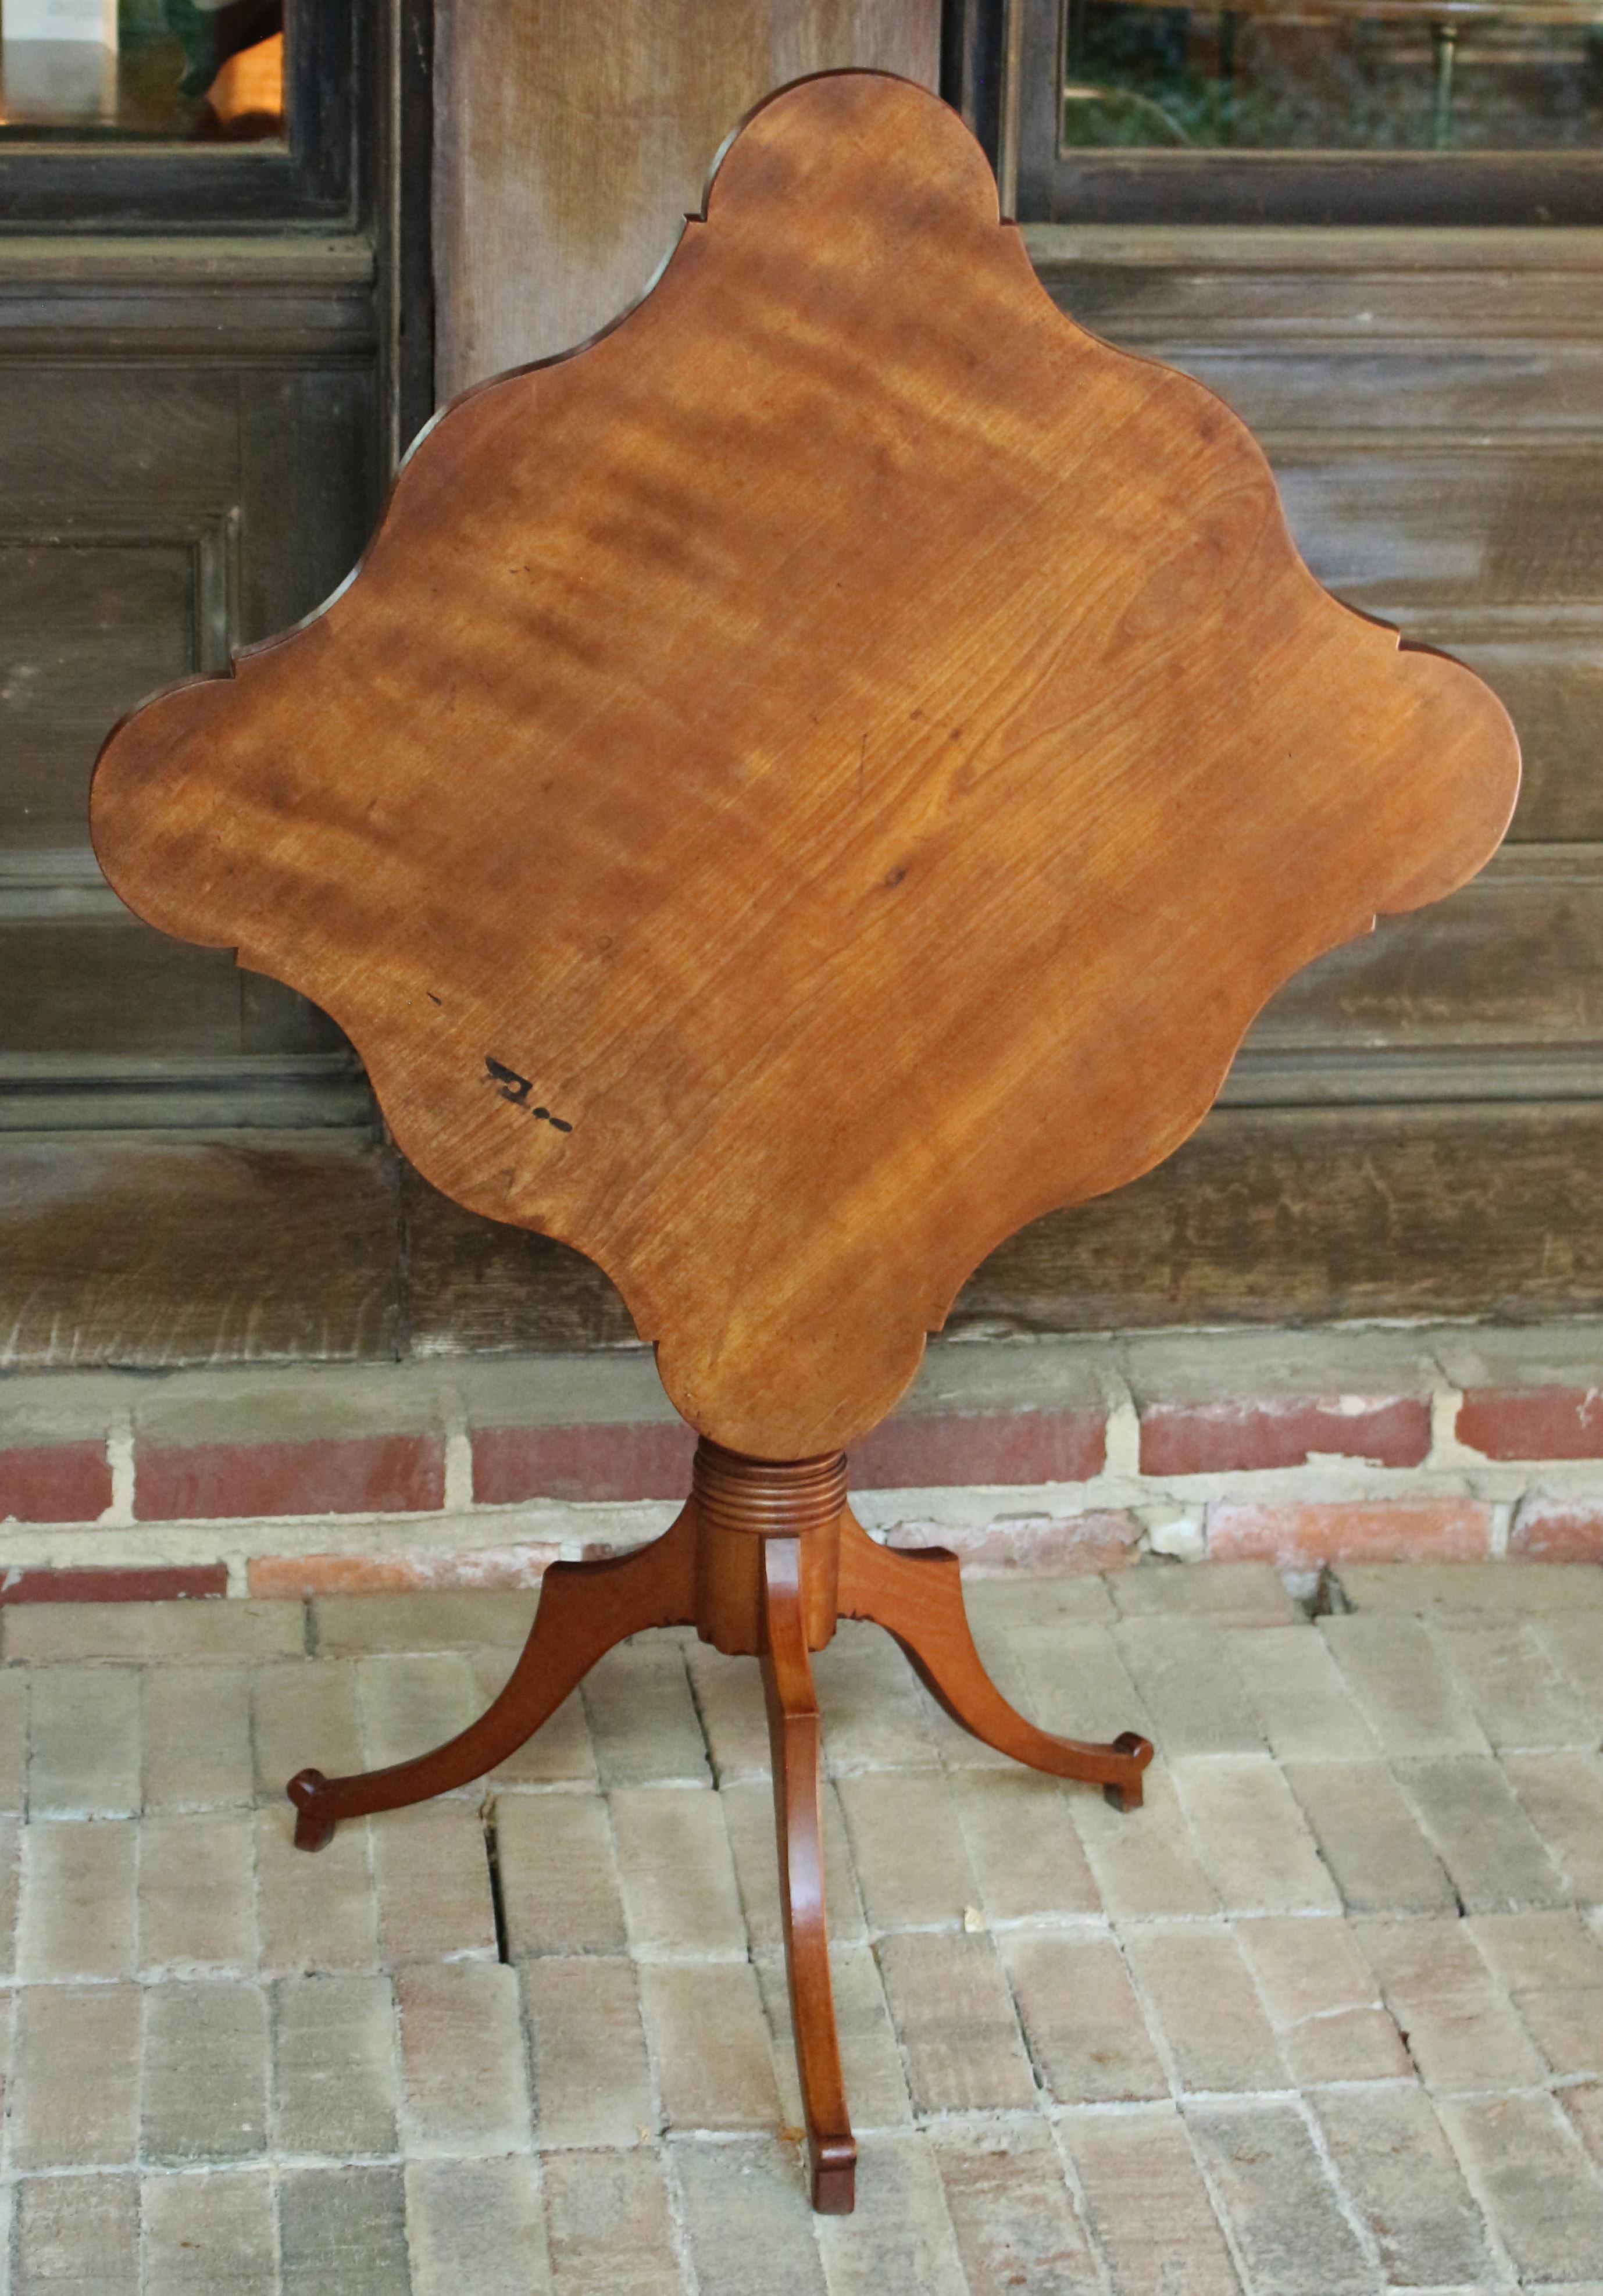 c.1820-30 American tilt-top tea table of cherry wood. Lovely shaped top, possibly done later or as an afterthought as it plays very well off the lovely shaped tripod pedestal base. Vasi-form and ring turned upright; shaped legs. Metal brace supports